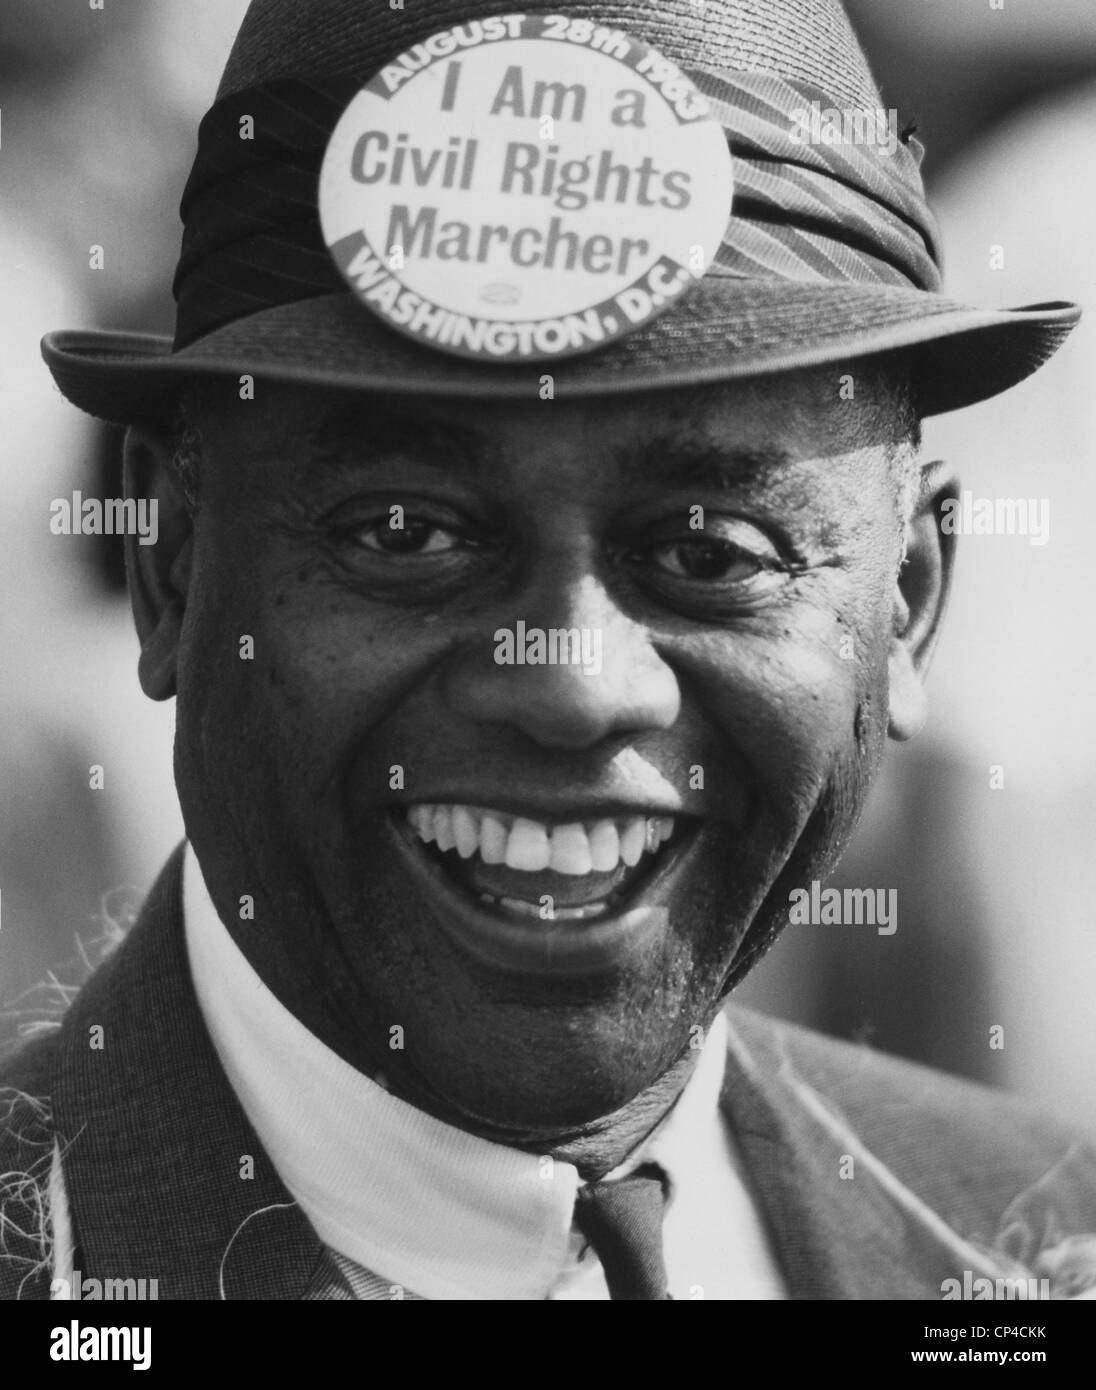 1963 March on Washington. Smiling marcher wearing a hat with a button that reads: 'I am a Civil Rights Marcher.' Aug. 28, 1963. Stock Photo